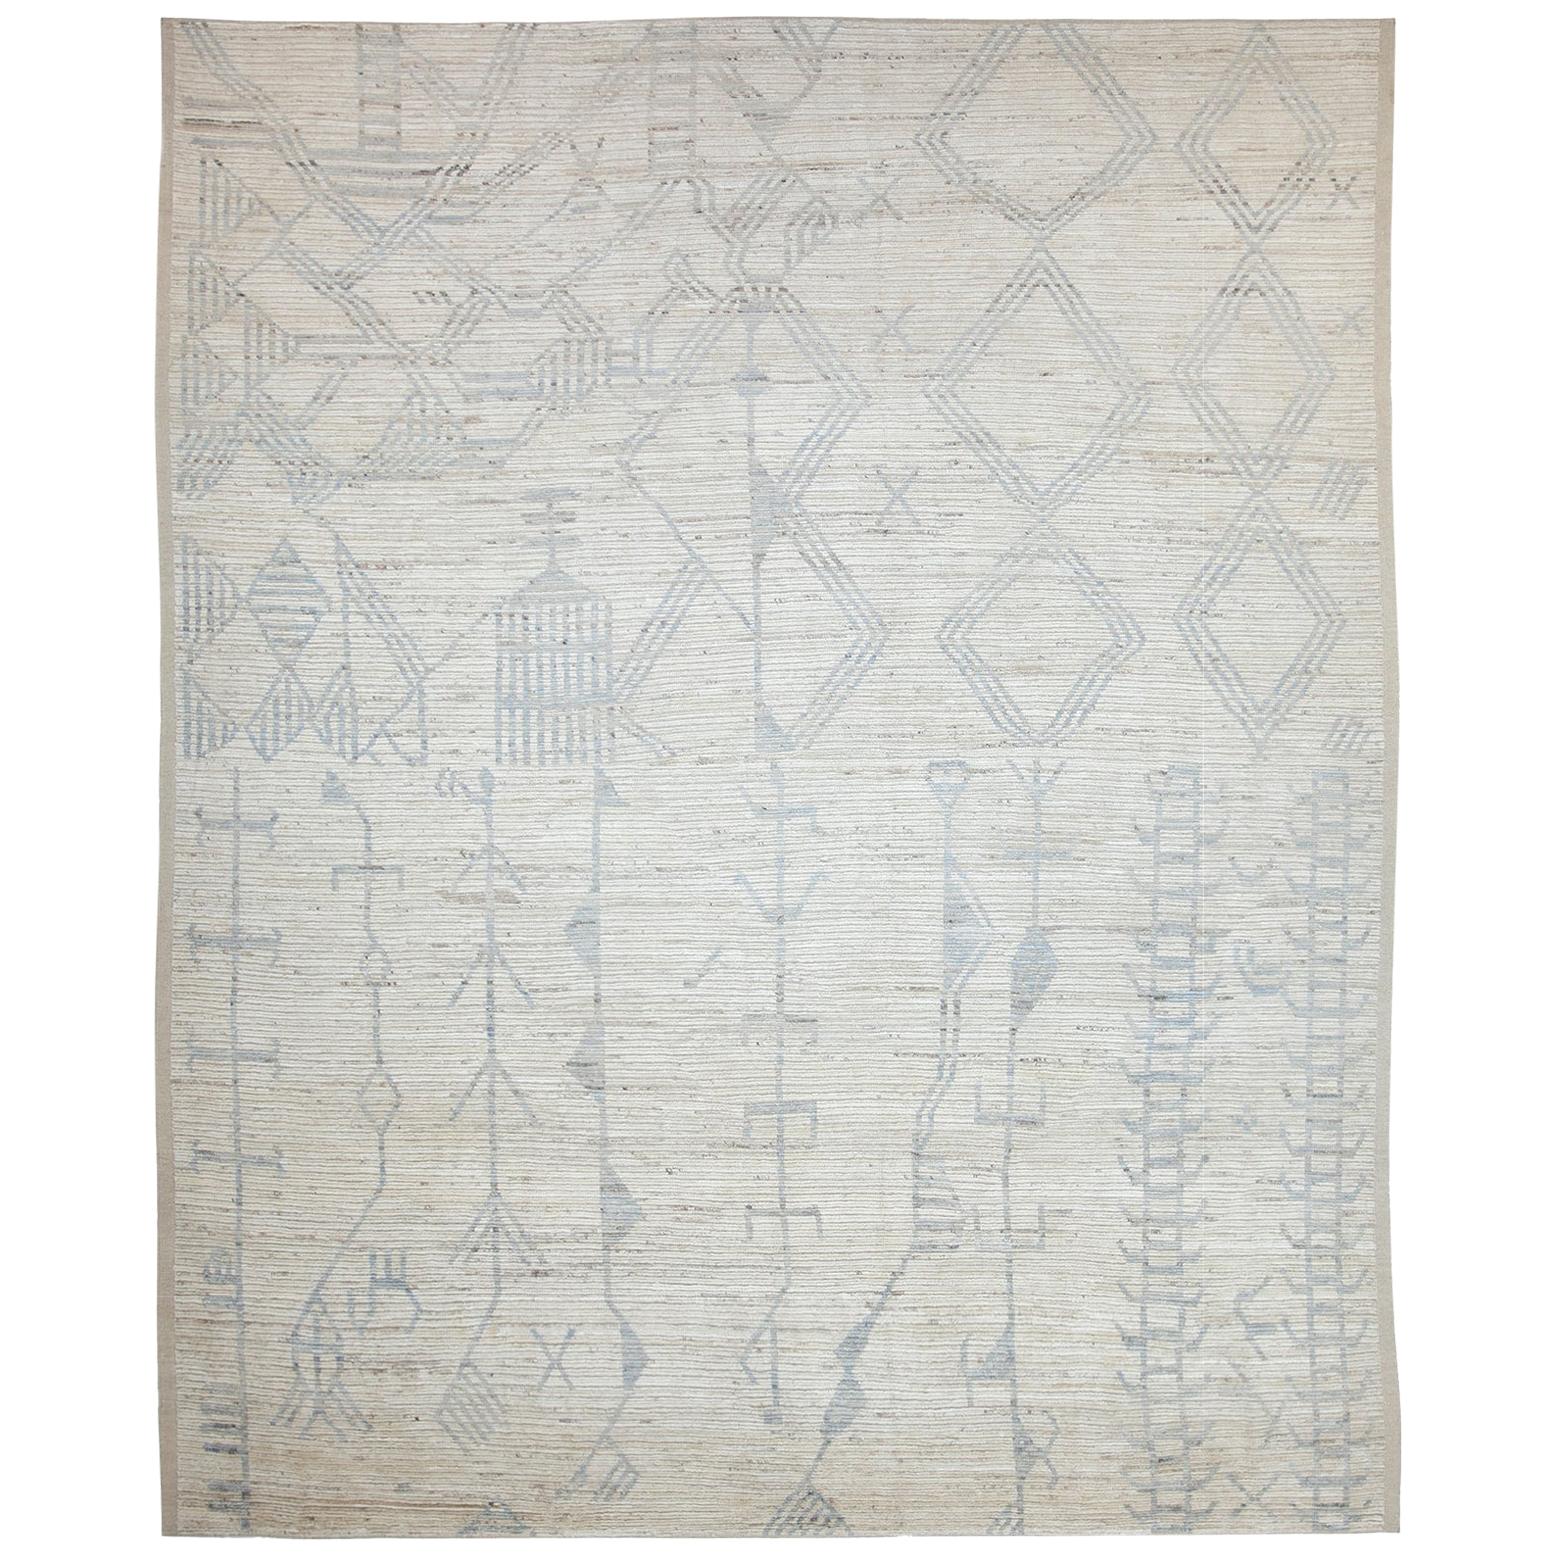 Nazmiyal Collection Beige Modern Moroccan Style Rug 9 ft 6 in x 11 ft 8 in